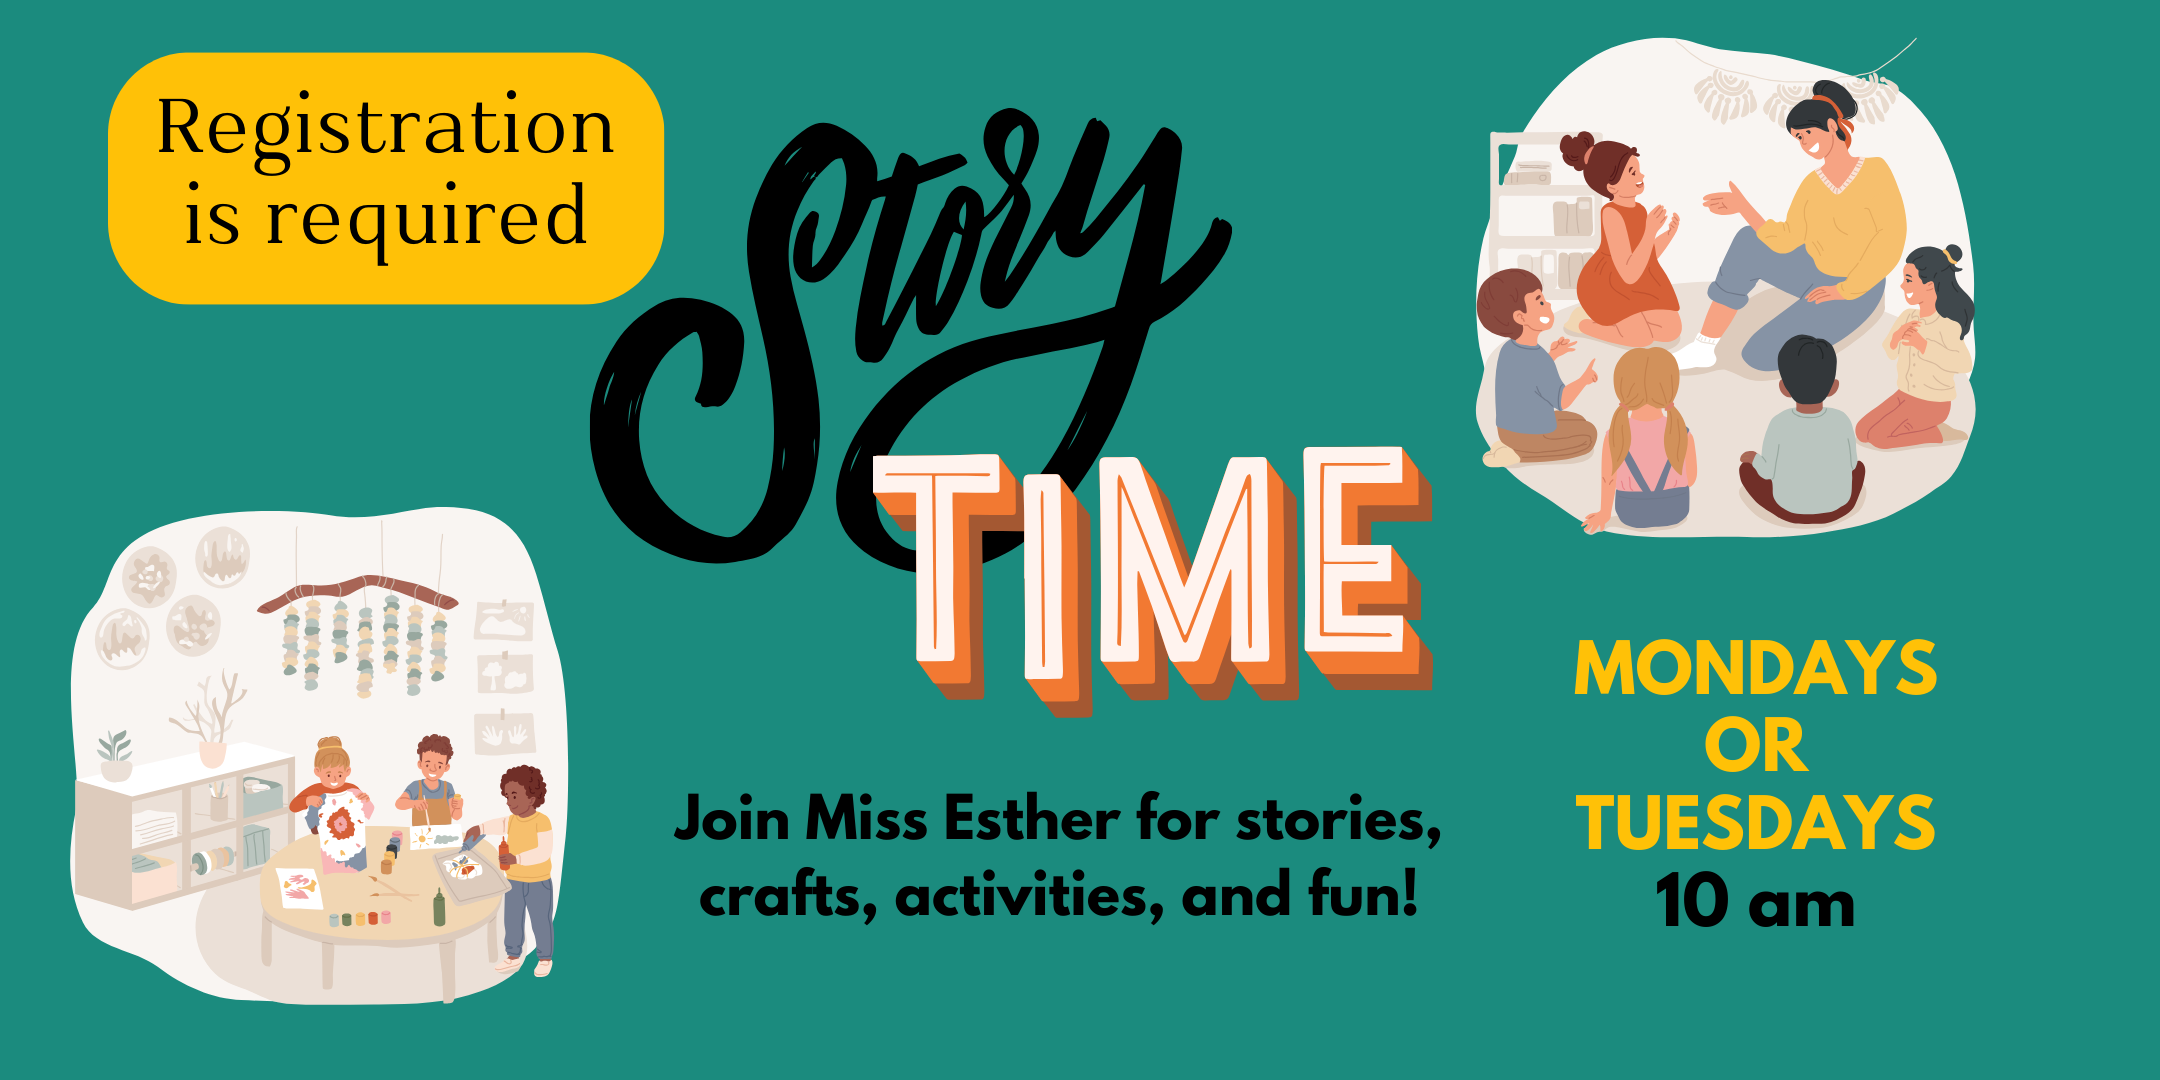 Story Time Summer 1 Mondays and Tuesdays 10am-11am. Registration is required.